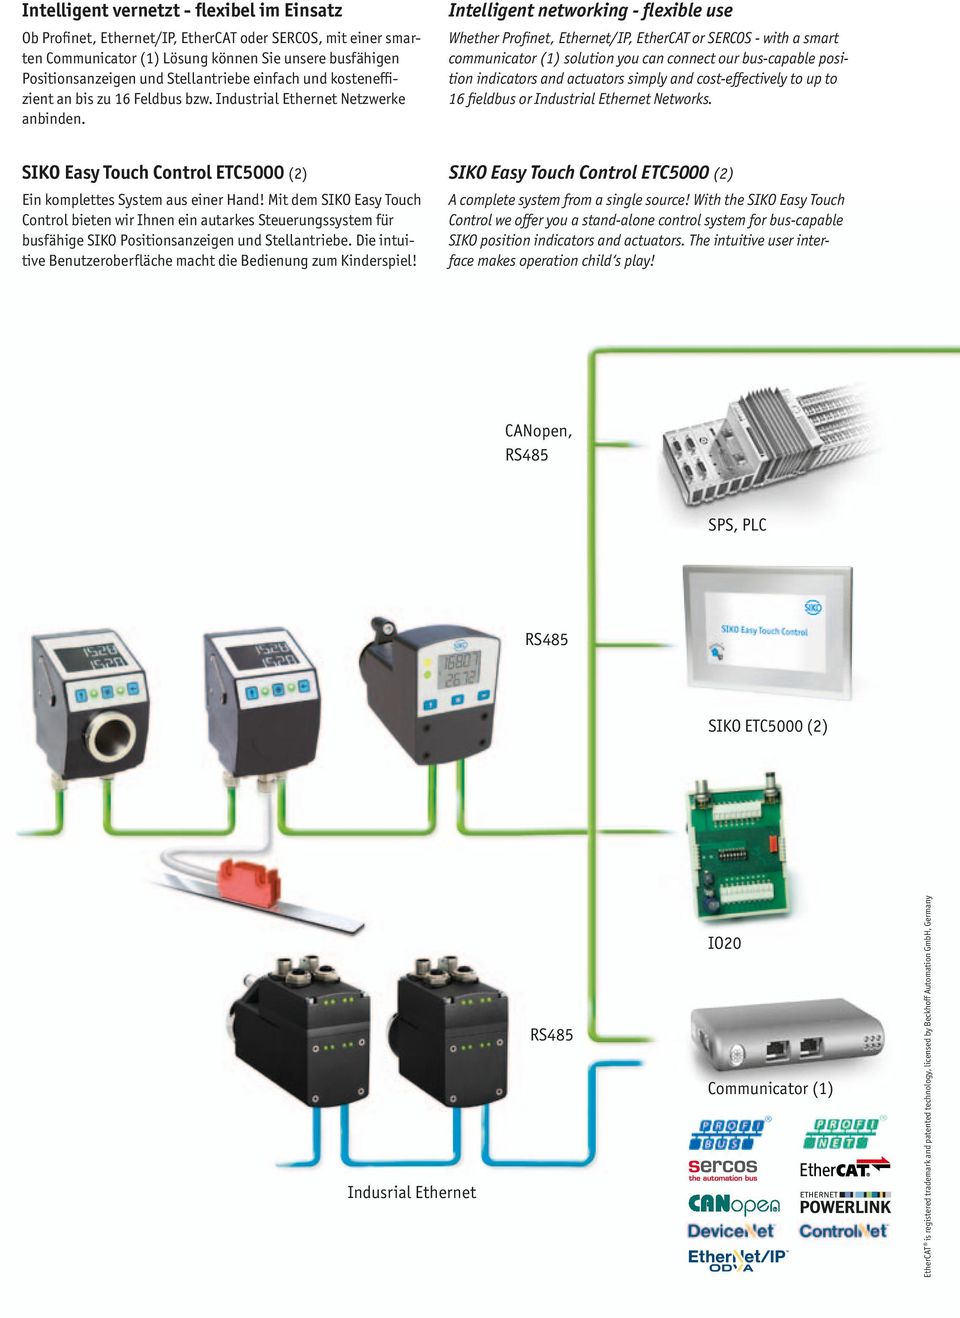 Intelligent networking - flexible use Whether Profinet, Ethernet/IP, EtherCAT or SERCOS - with a smart communicator (1) solution you can connect our bus-capable position indicators and actuators